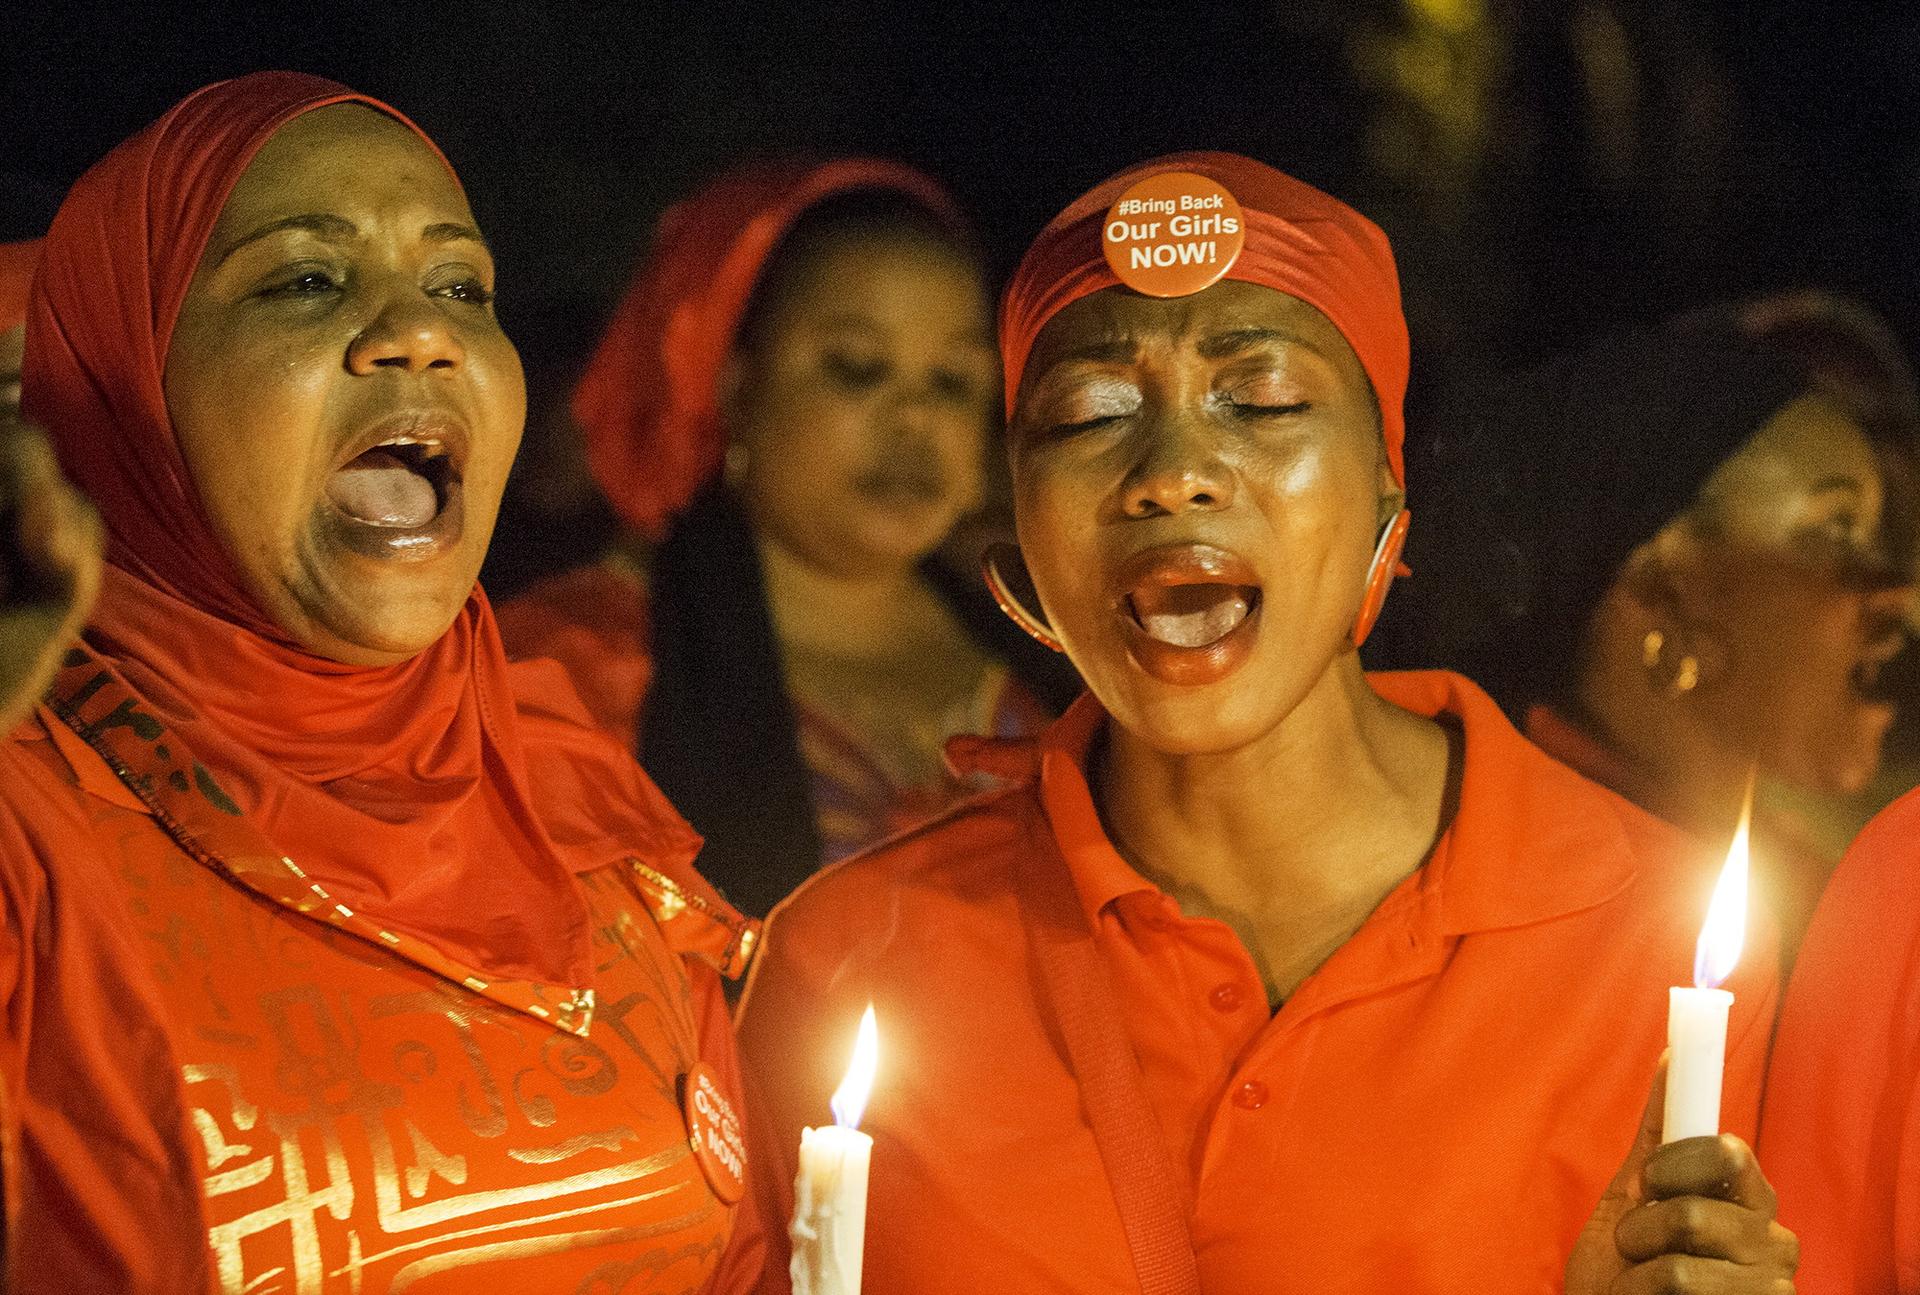 Nigerians held vigils for the girls kidnapped by the extremist group Boko Haram on the one year anniversary of their abduction, April 14, 2015.